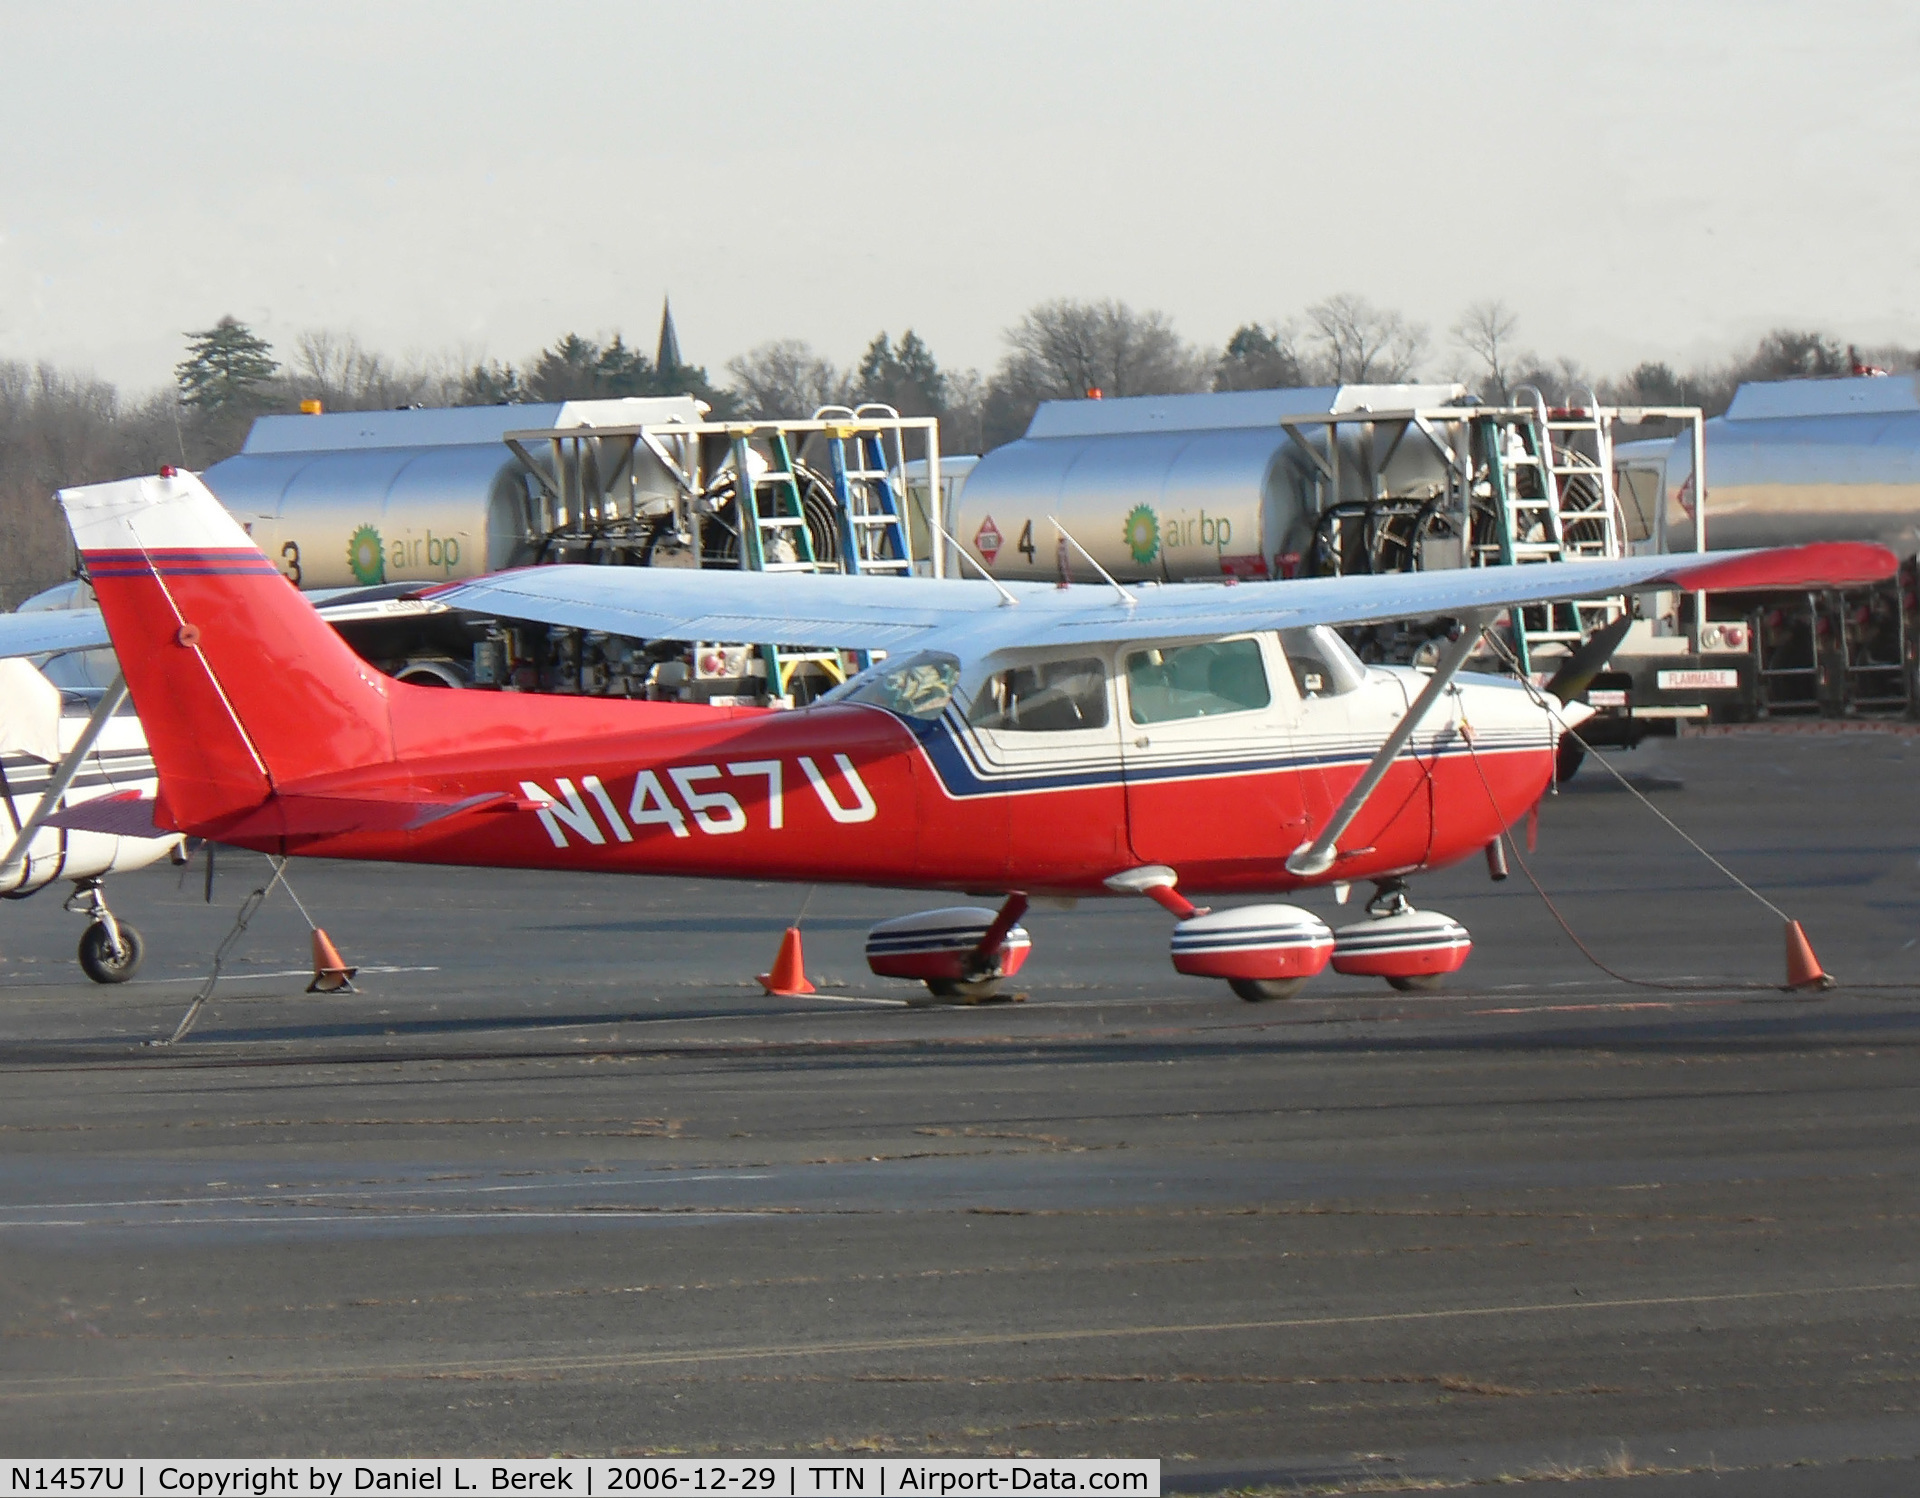 N1457U, 1976 Cessna 172M C/N 17267124, An old bird still looking good after all these years.